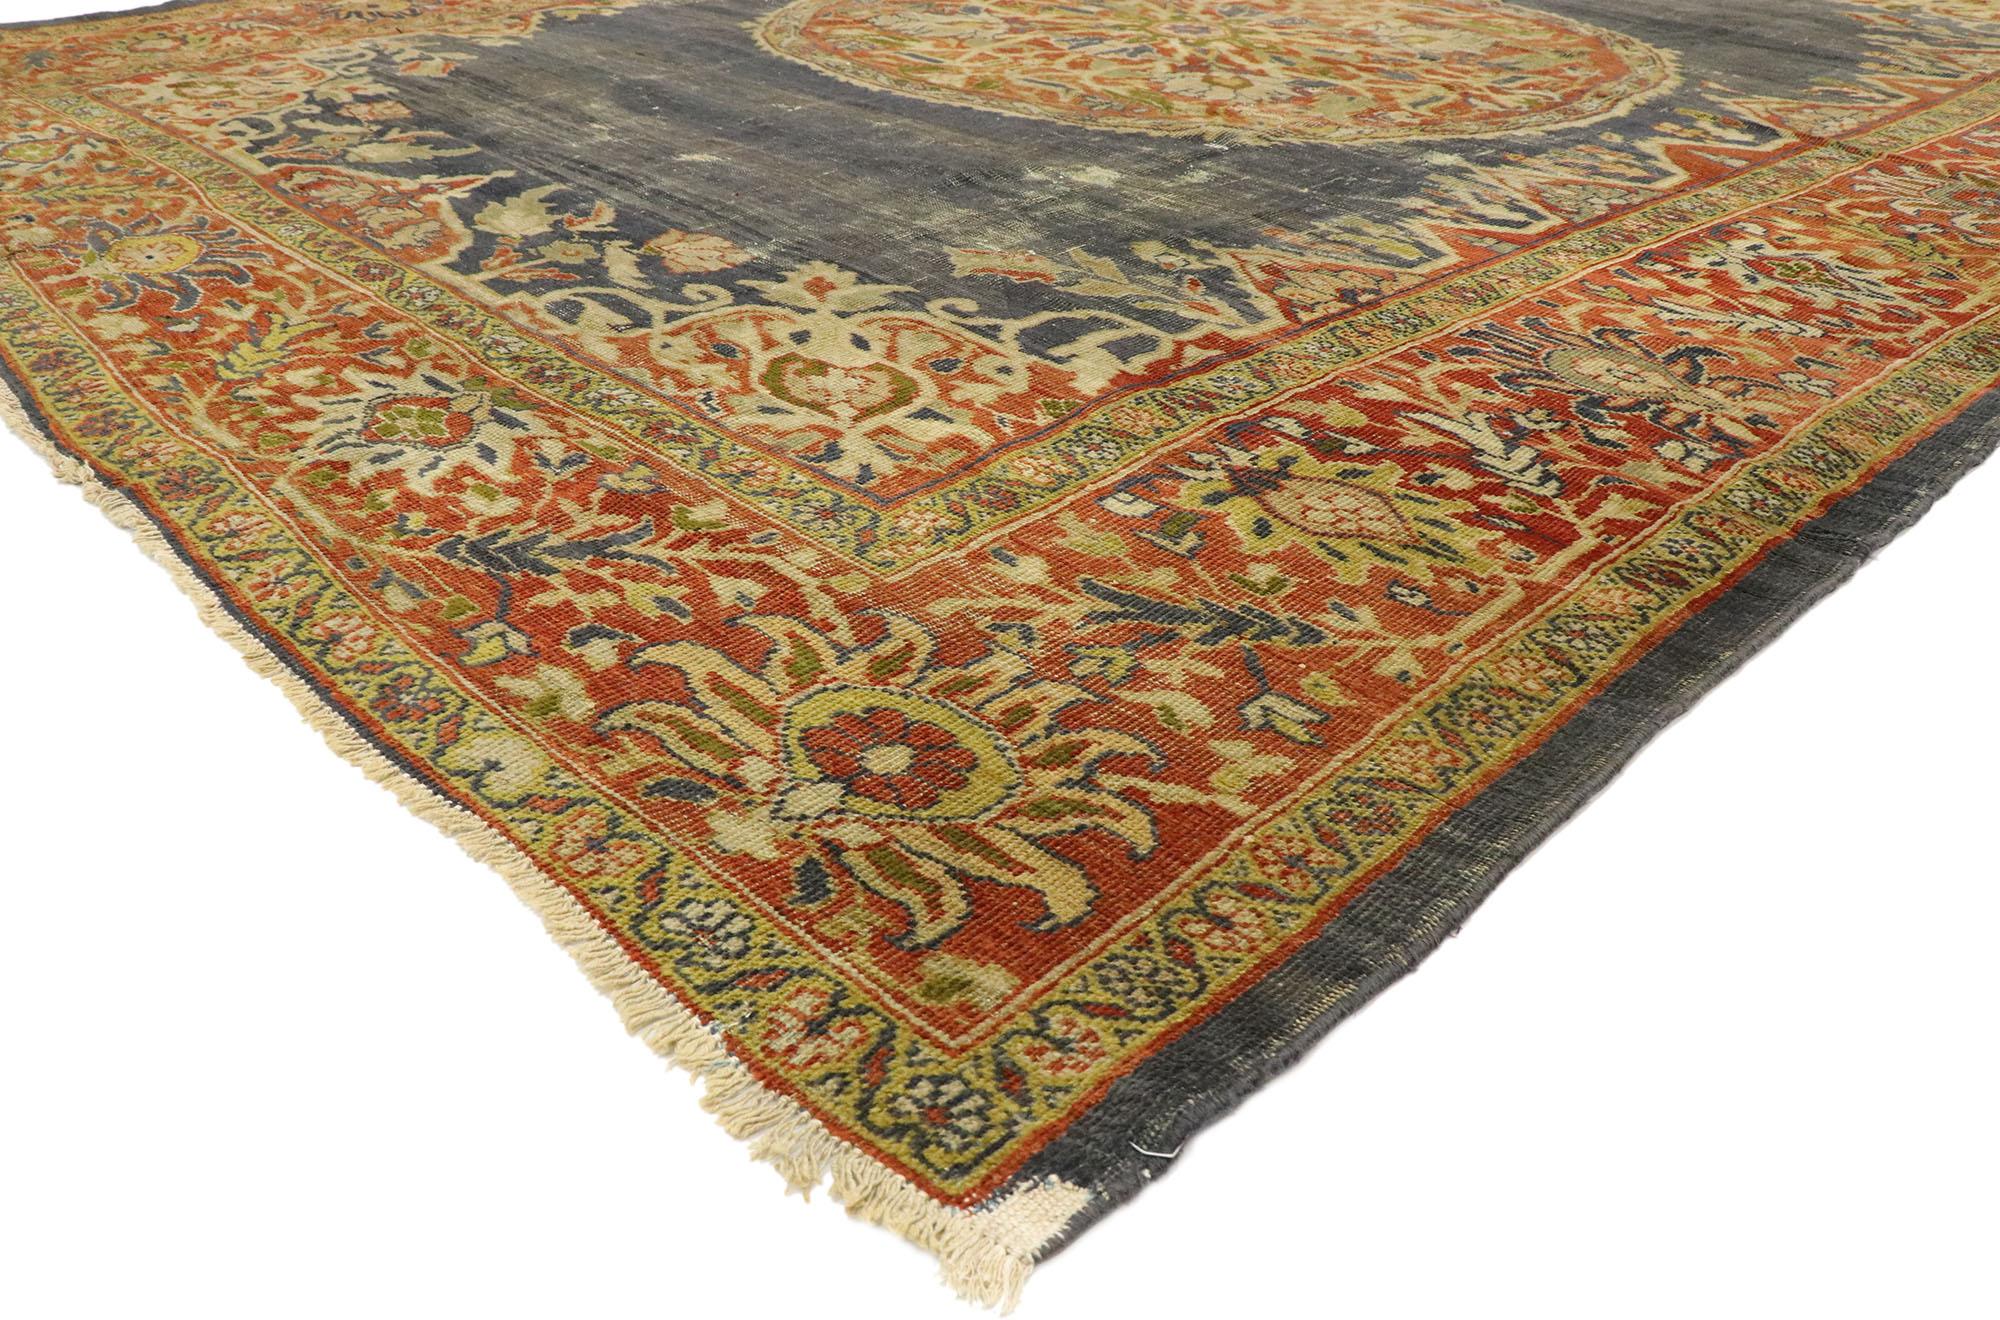 76796 Distressed Antique Persian Sultanabad rug with Rustic Artisan Industrial style. With its time-softened color palette and weathered charm, this hand knotted wool distressed Persian Sultanabad area rug beautifully showcases a rustic Artisan